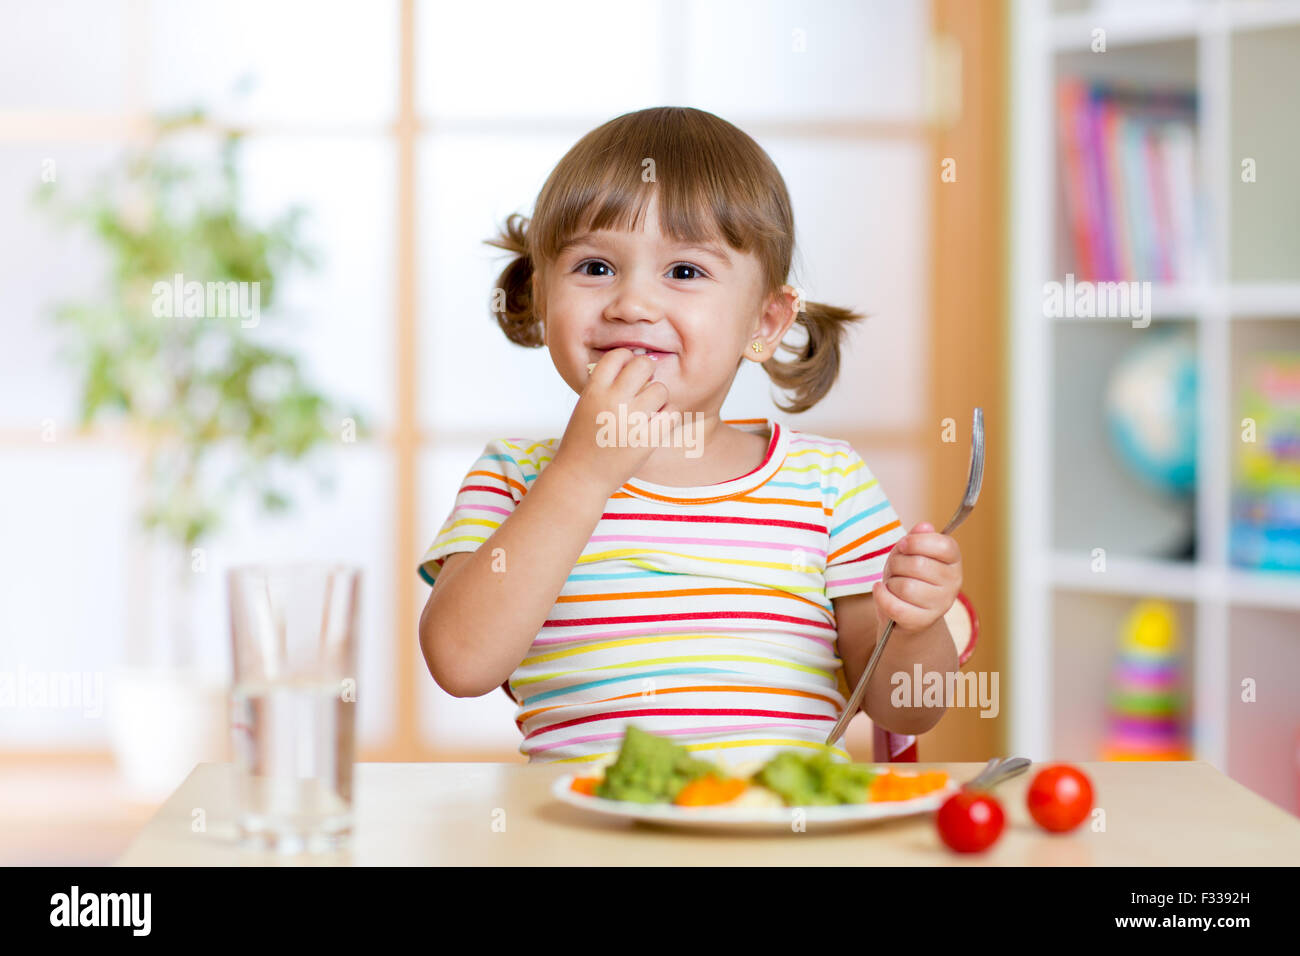 Happy child girl eats vegetables sitting at table in nursery Stock Photo